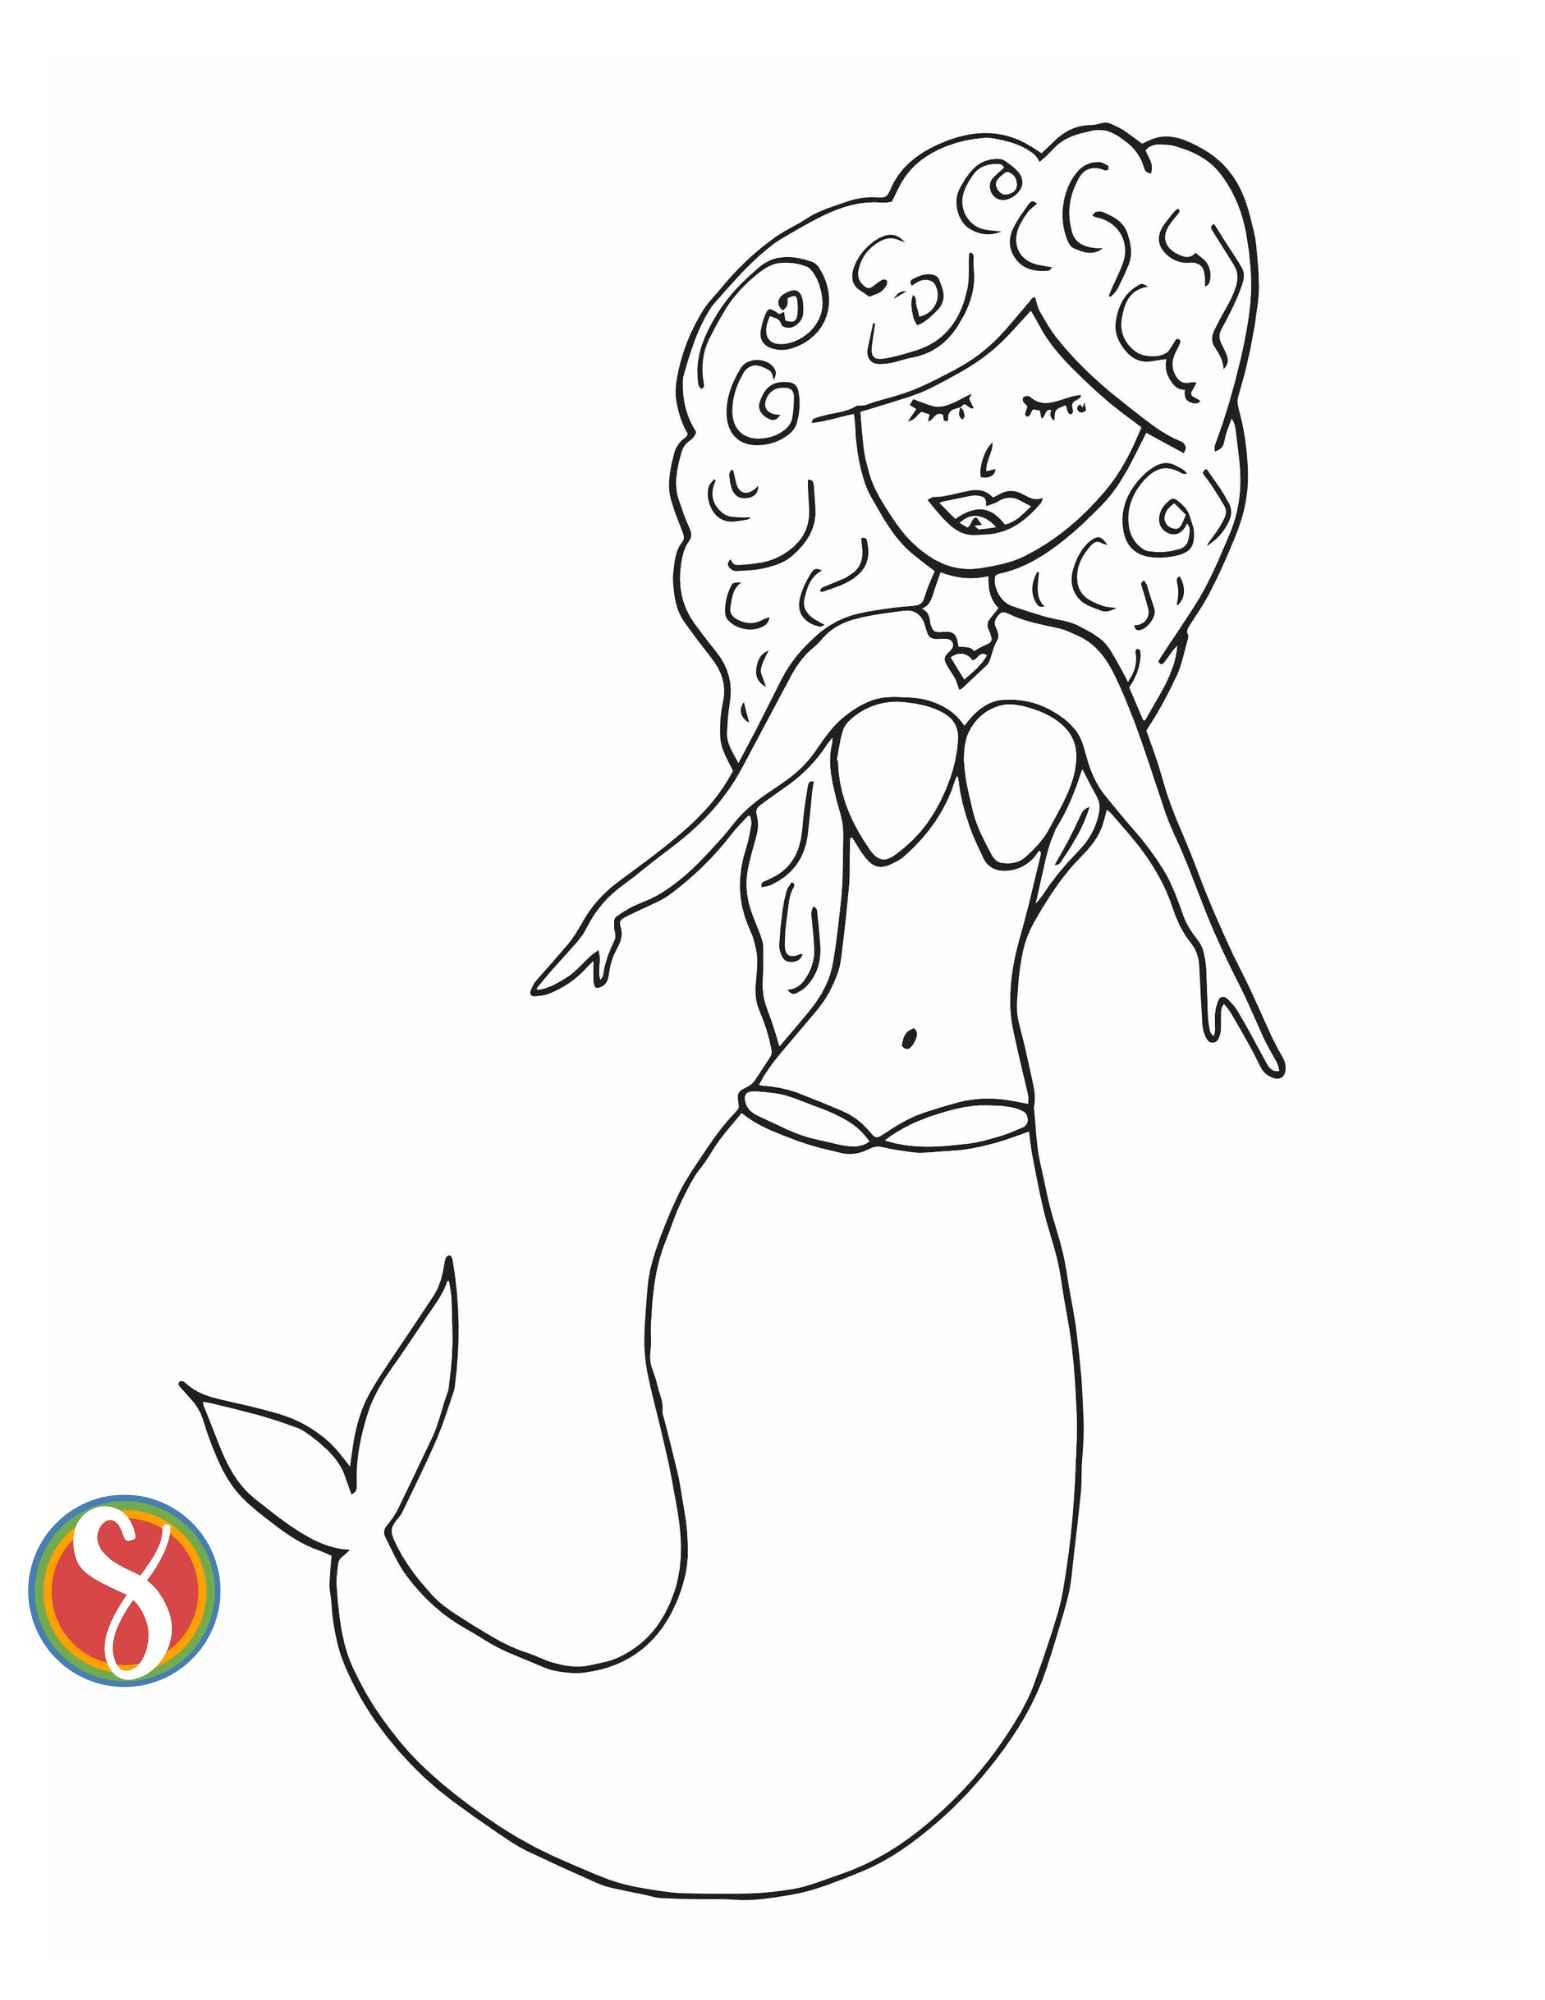 a simple mermaid outline with curly hair, closed eyes